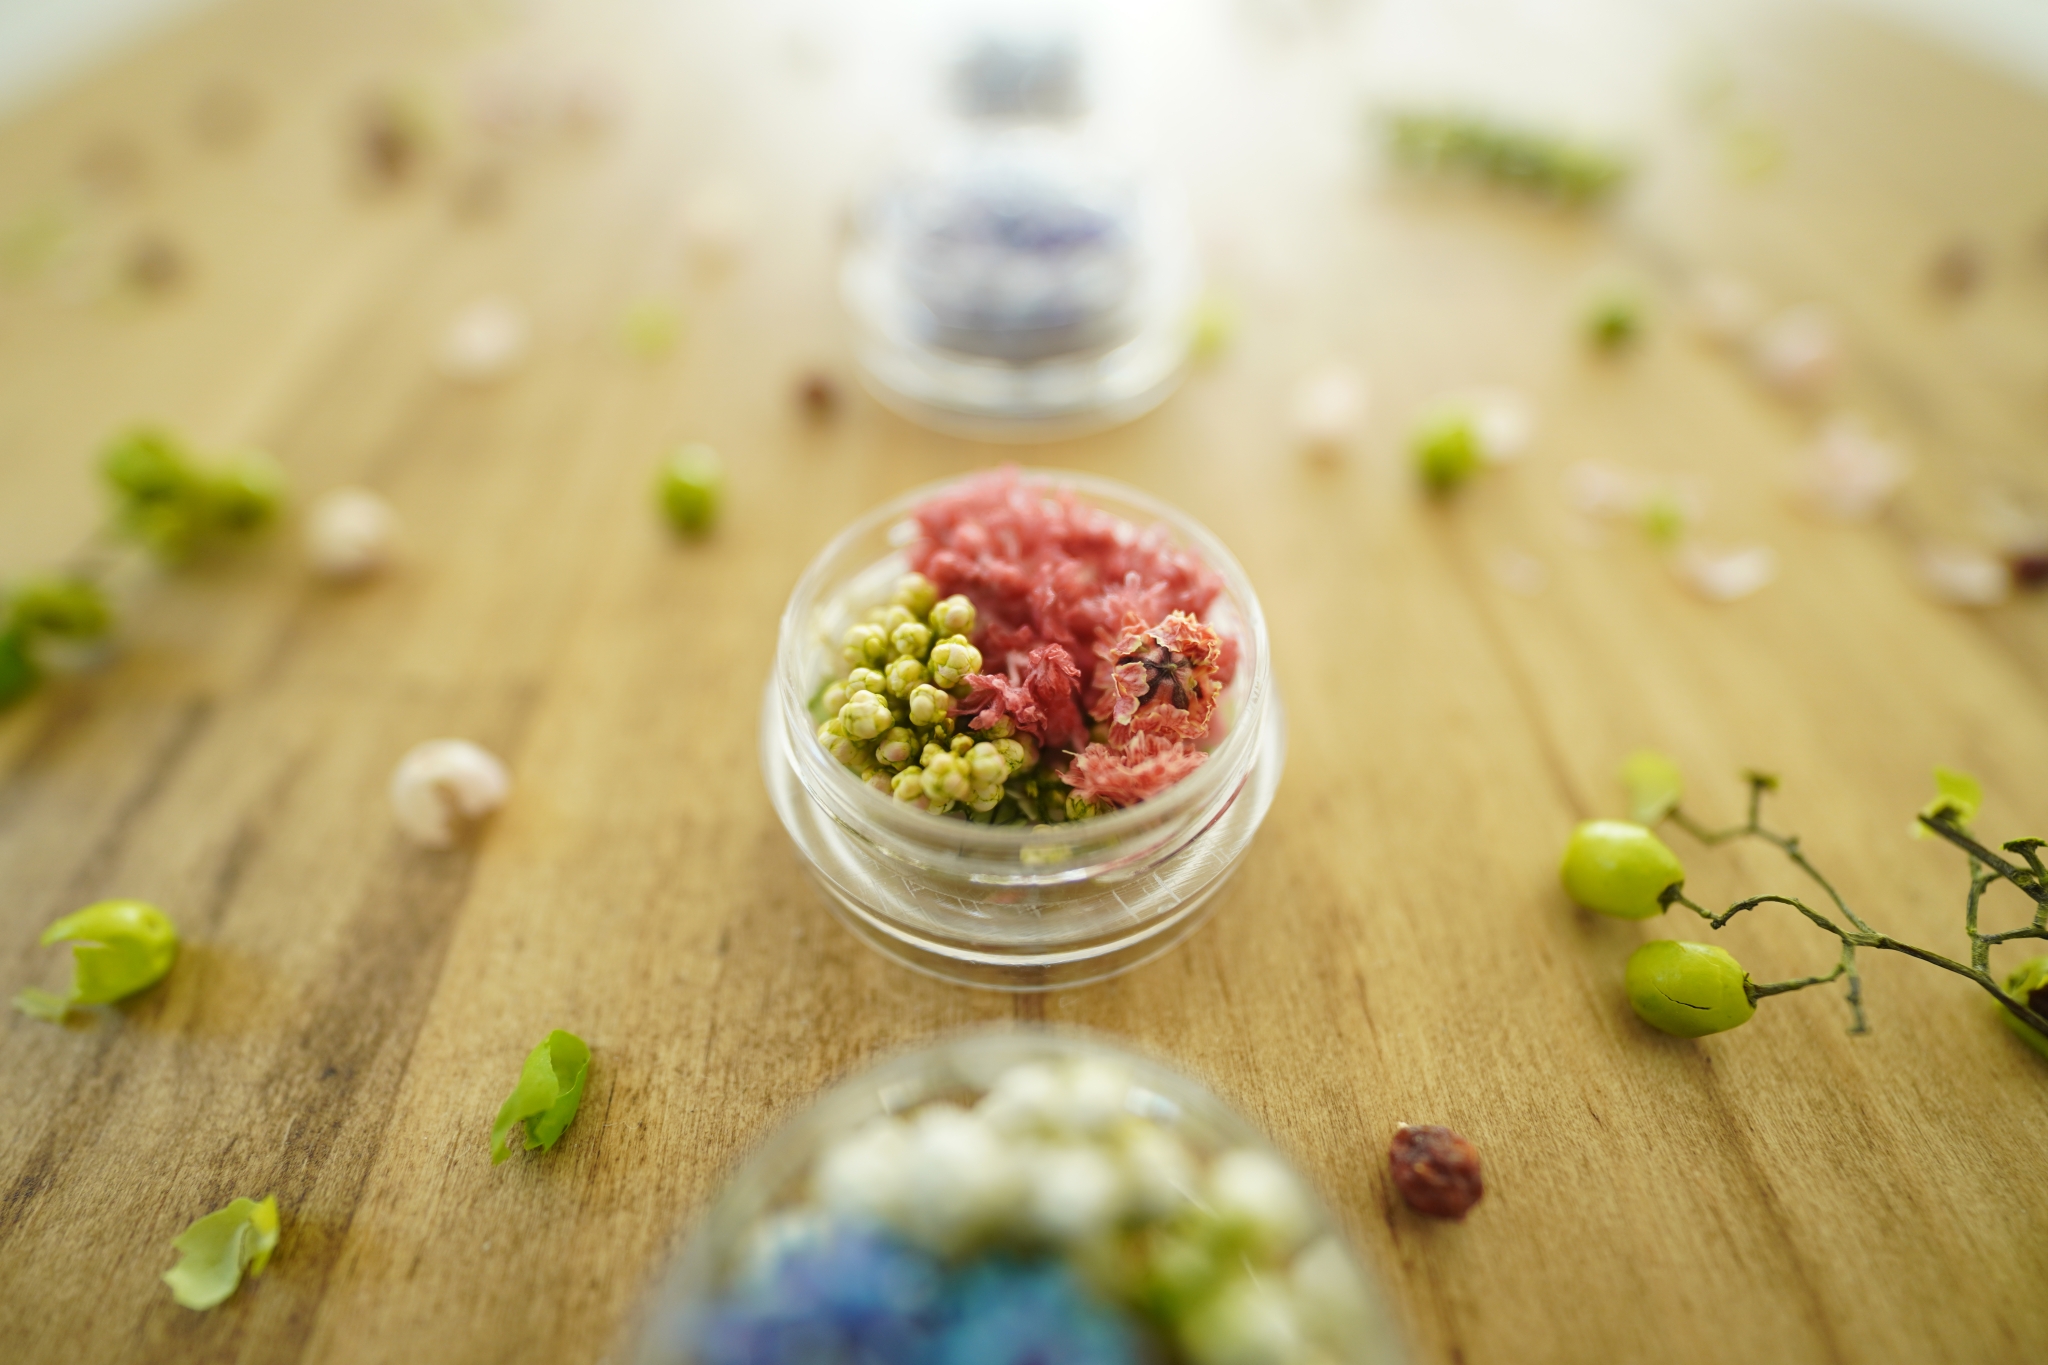 Decorative berries and flowers in a small glass vase with bokeh foreground and background